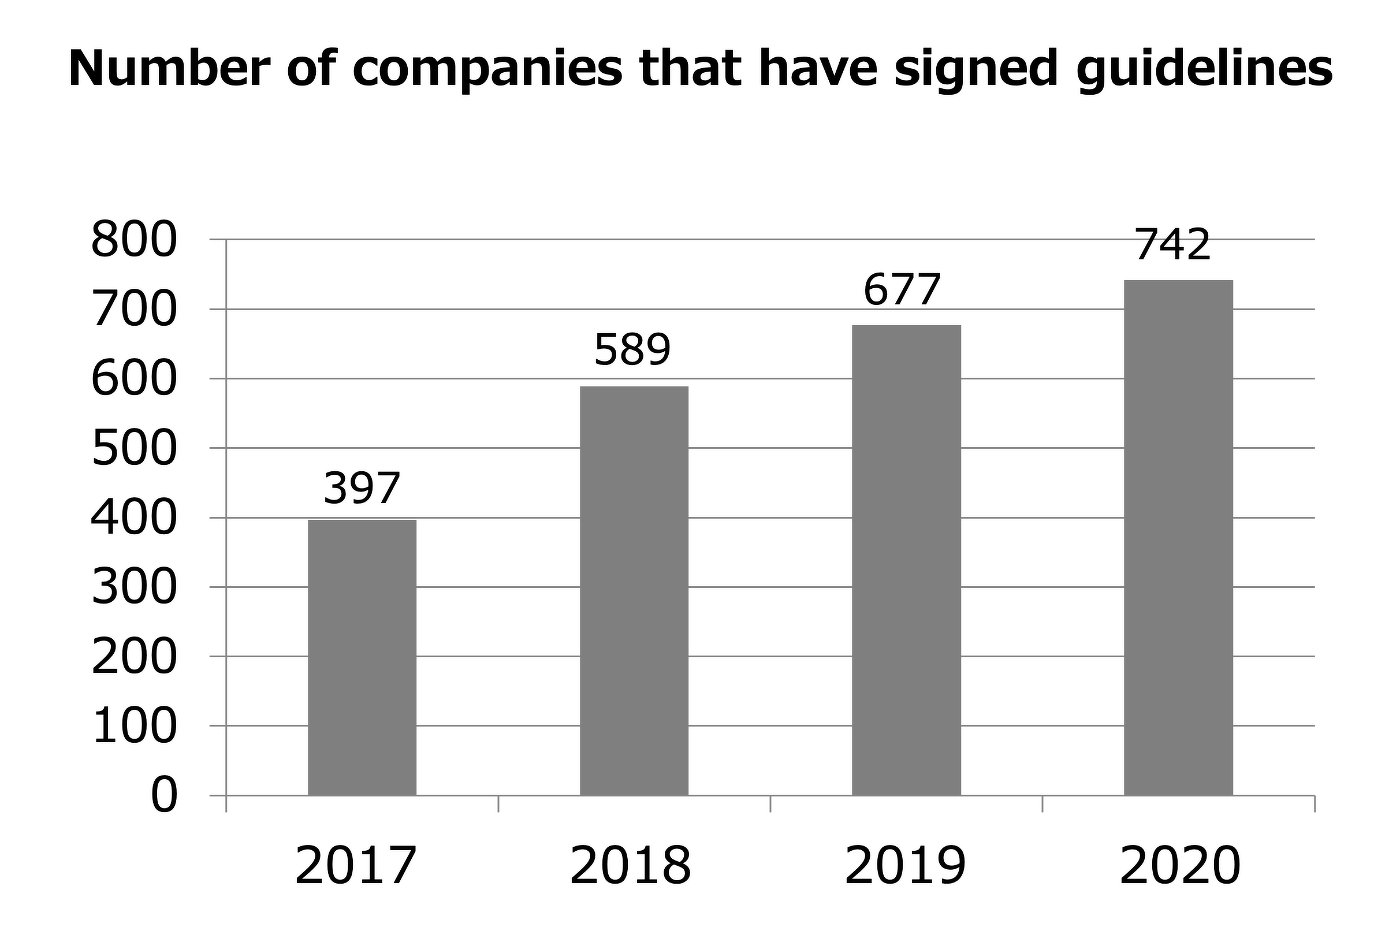 Number of companies that have signed guidelines